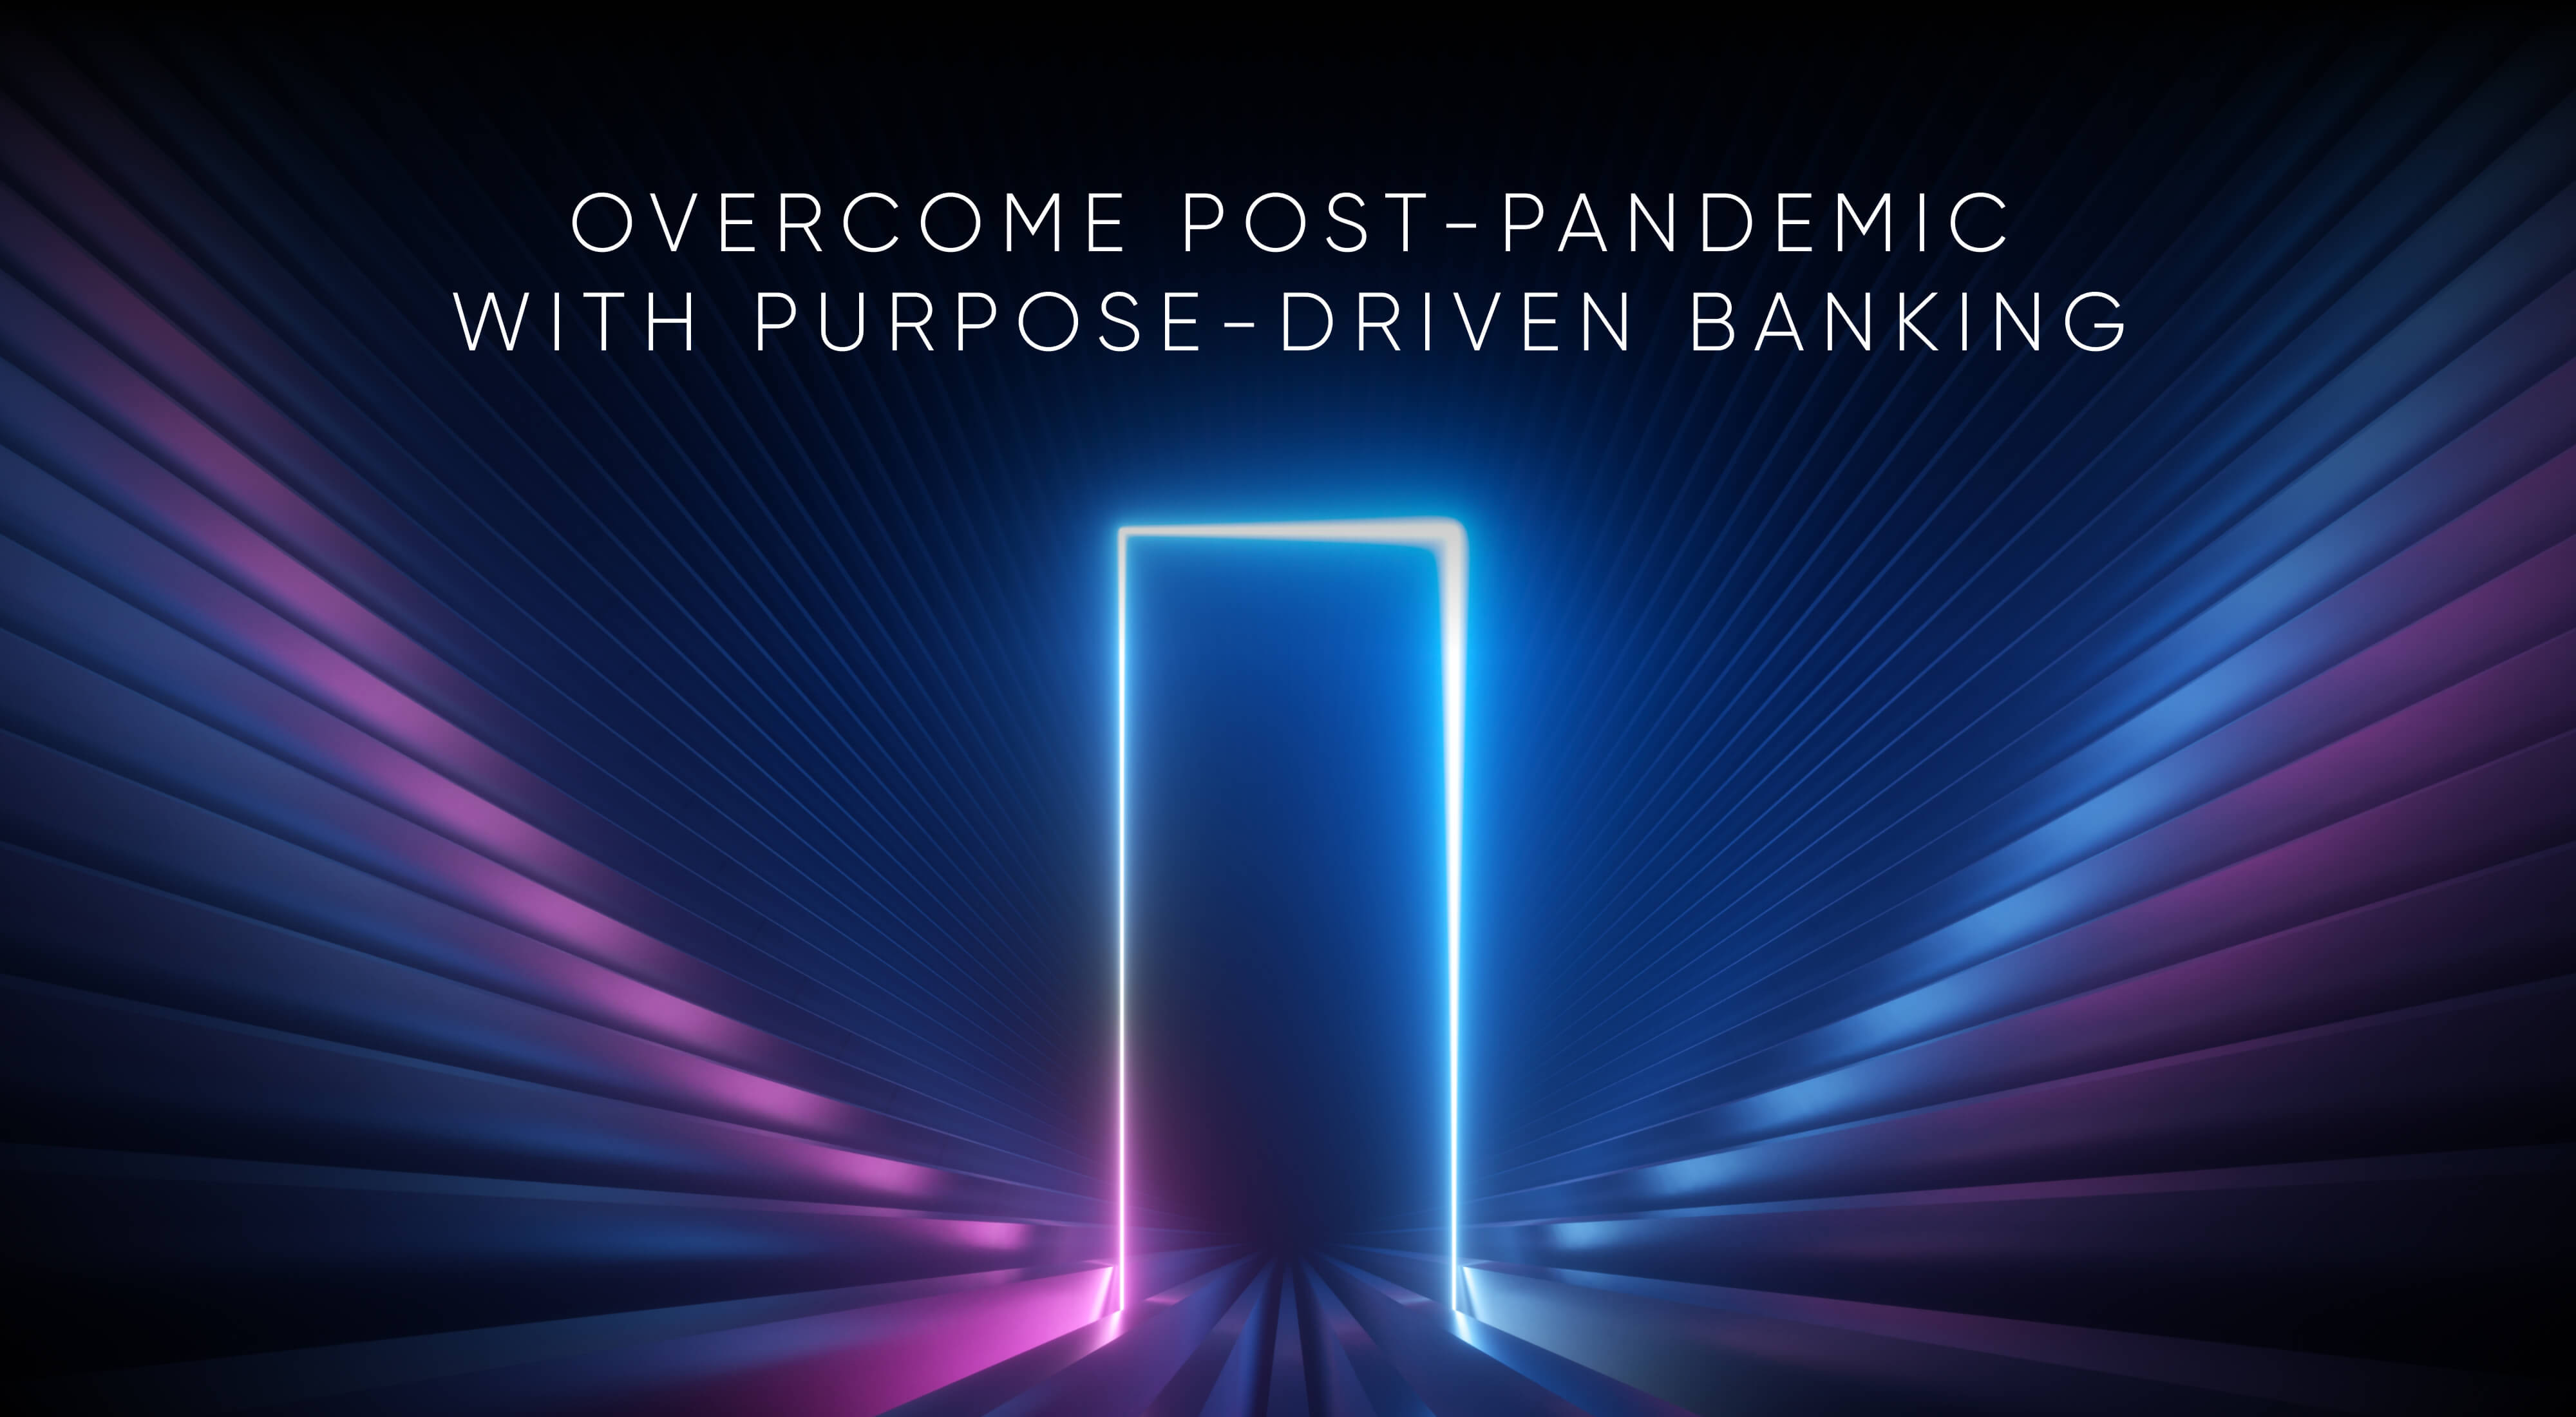 Digital Transformation in Banking Based on Purpose-Driven Strategy